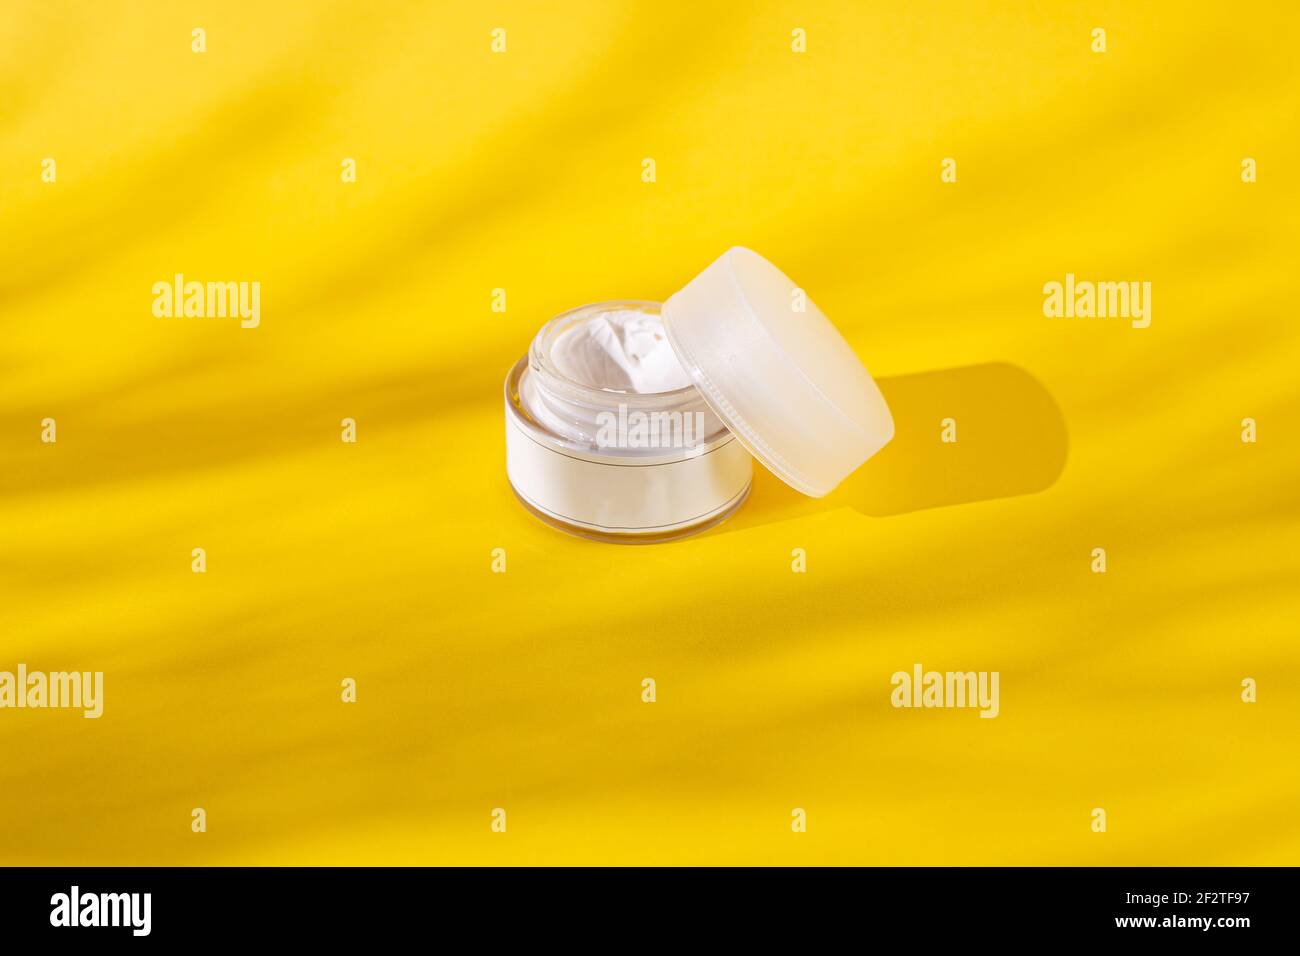 Skin Care Cream jar or bottle in a yellow background with shades, add your own logo or text Stock Photo